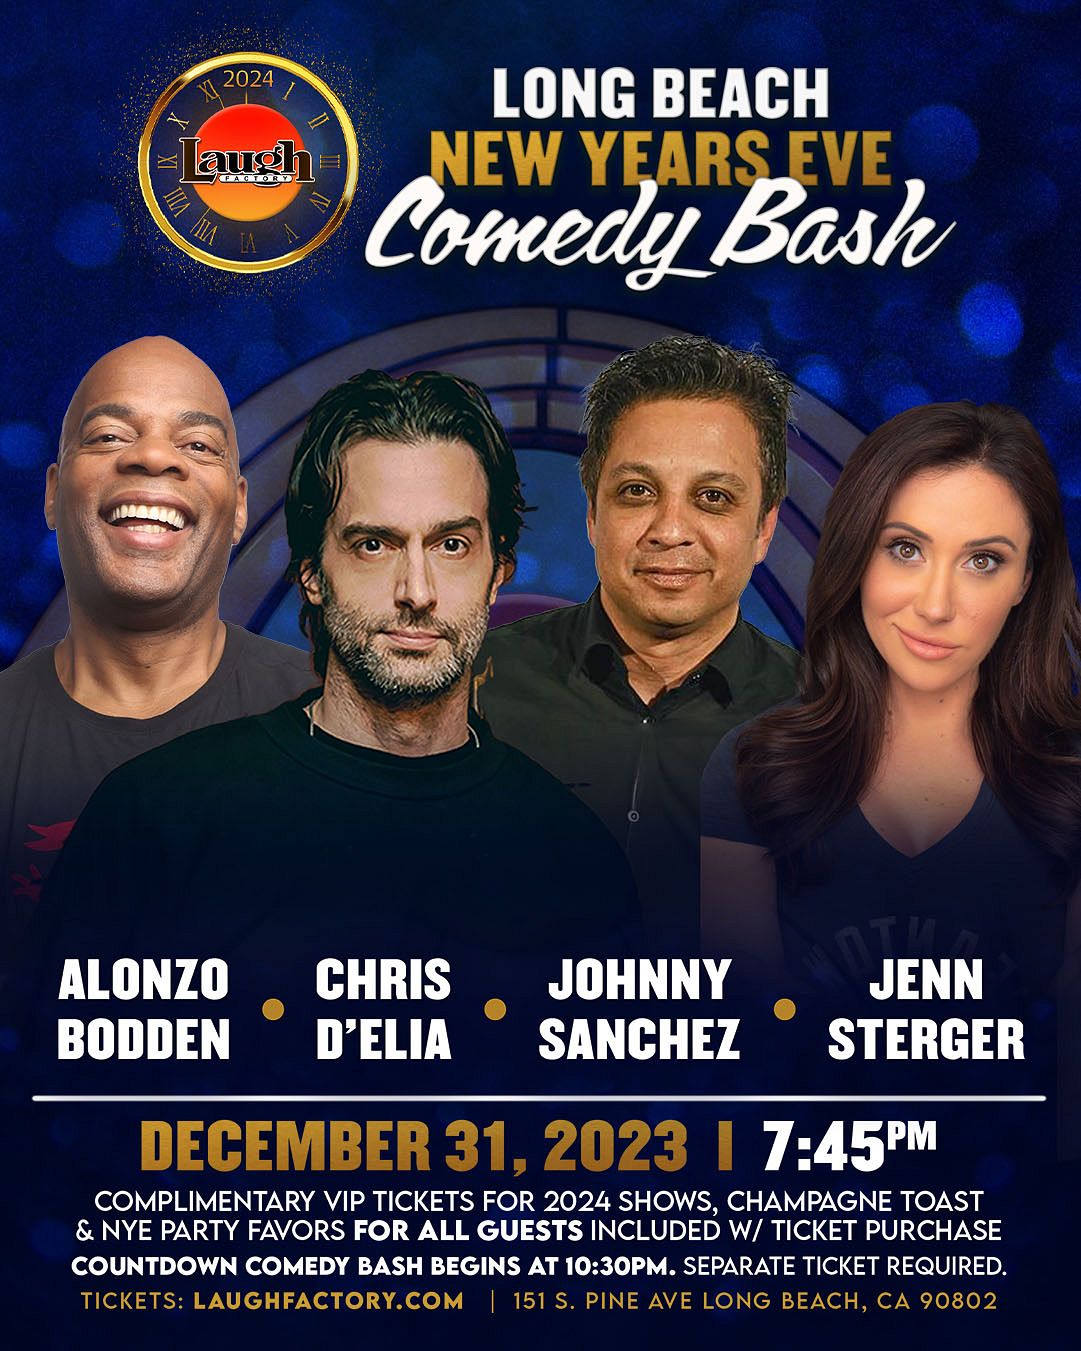 New Years Eve Comedy Bash Tickets at Laugh Factory Long Beach in Long